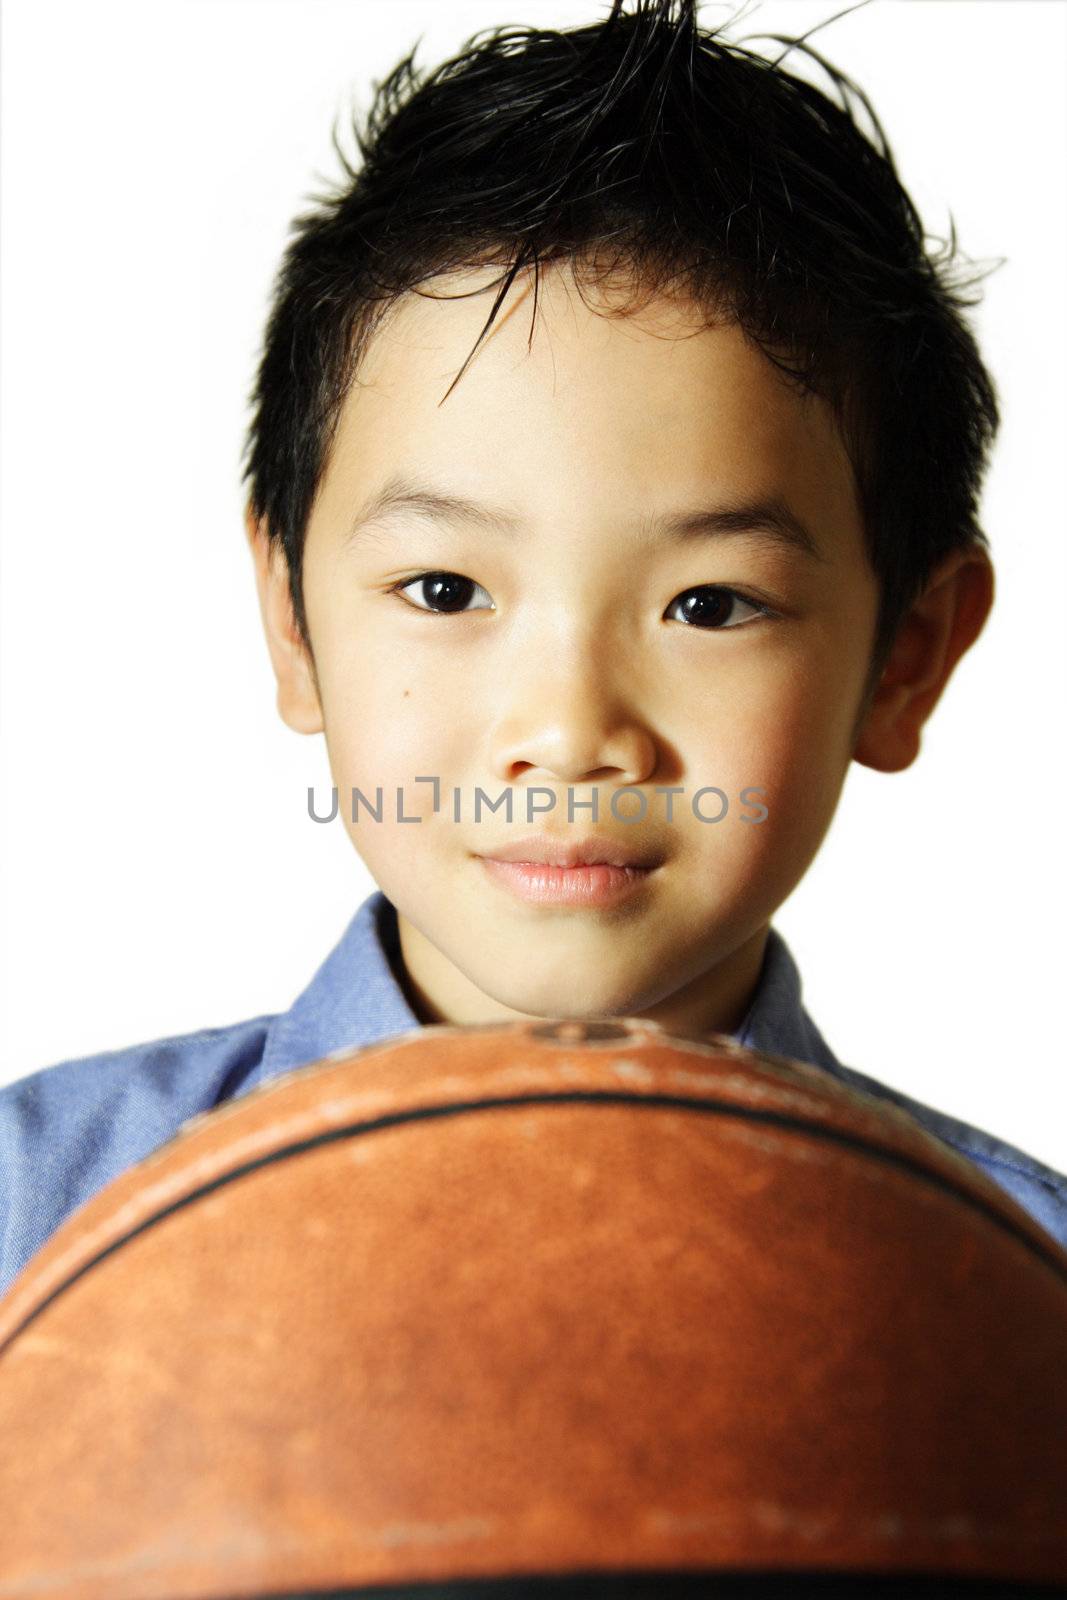 A portrait of a young boy with a basketball